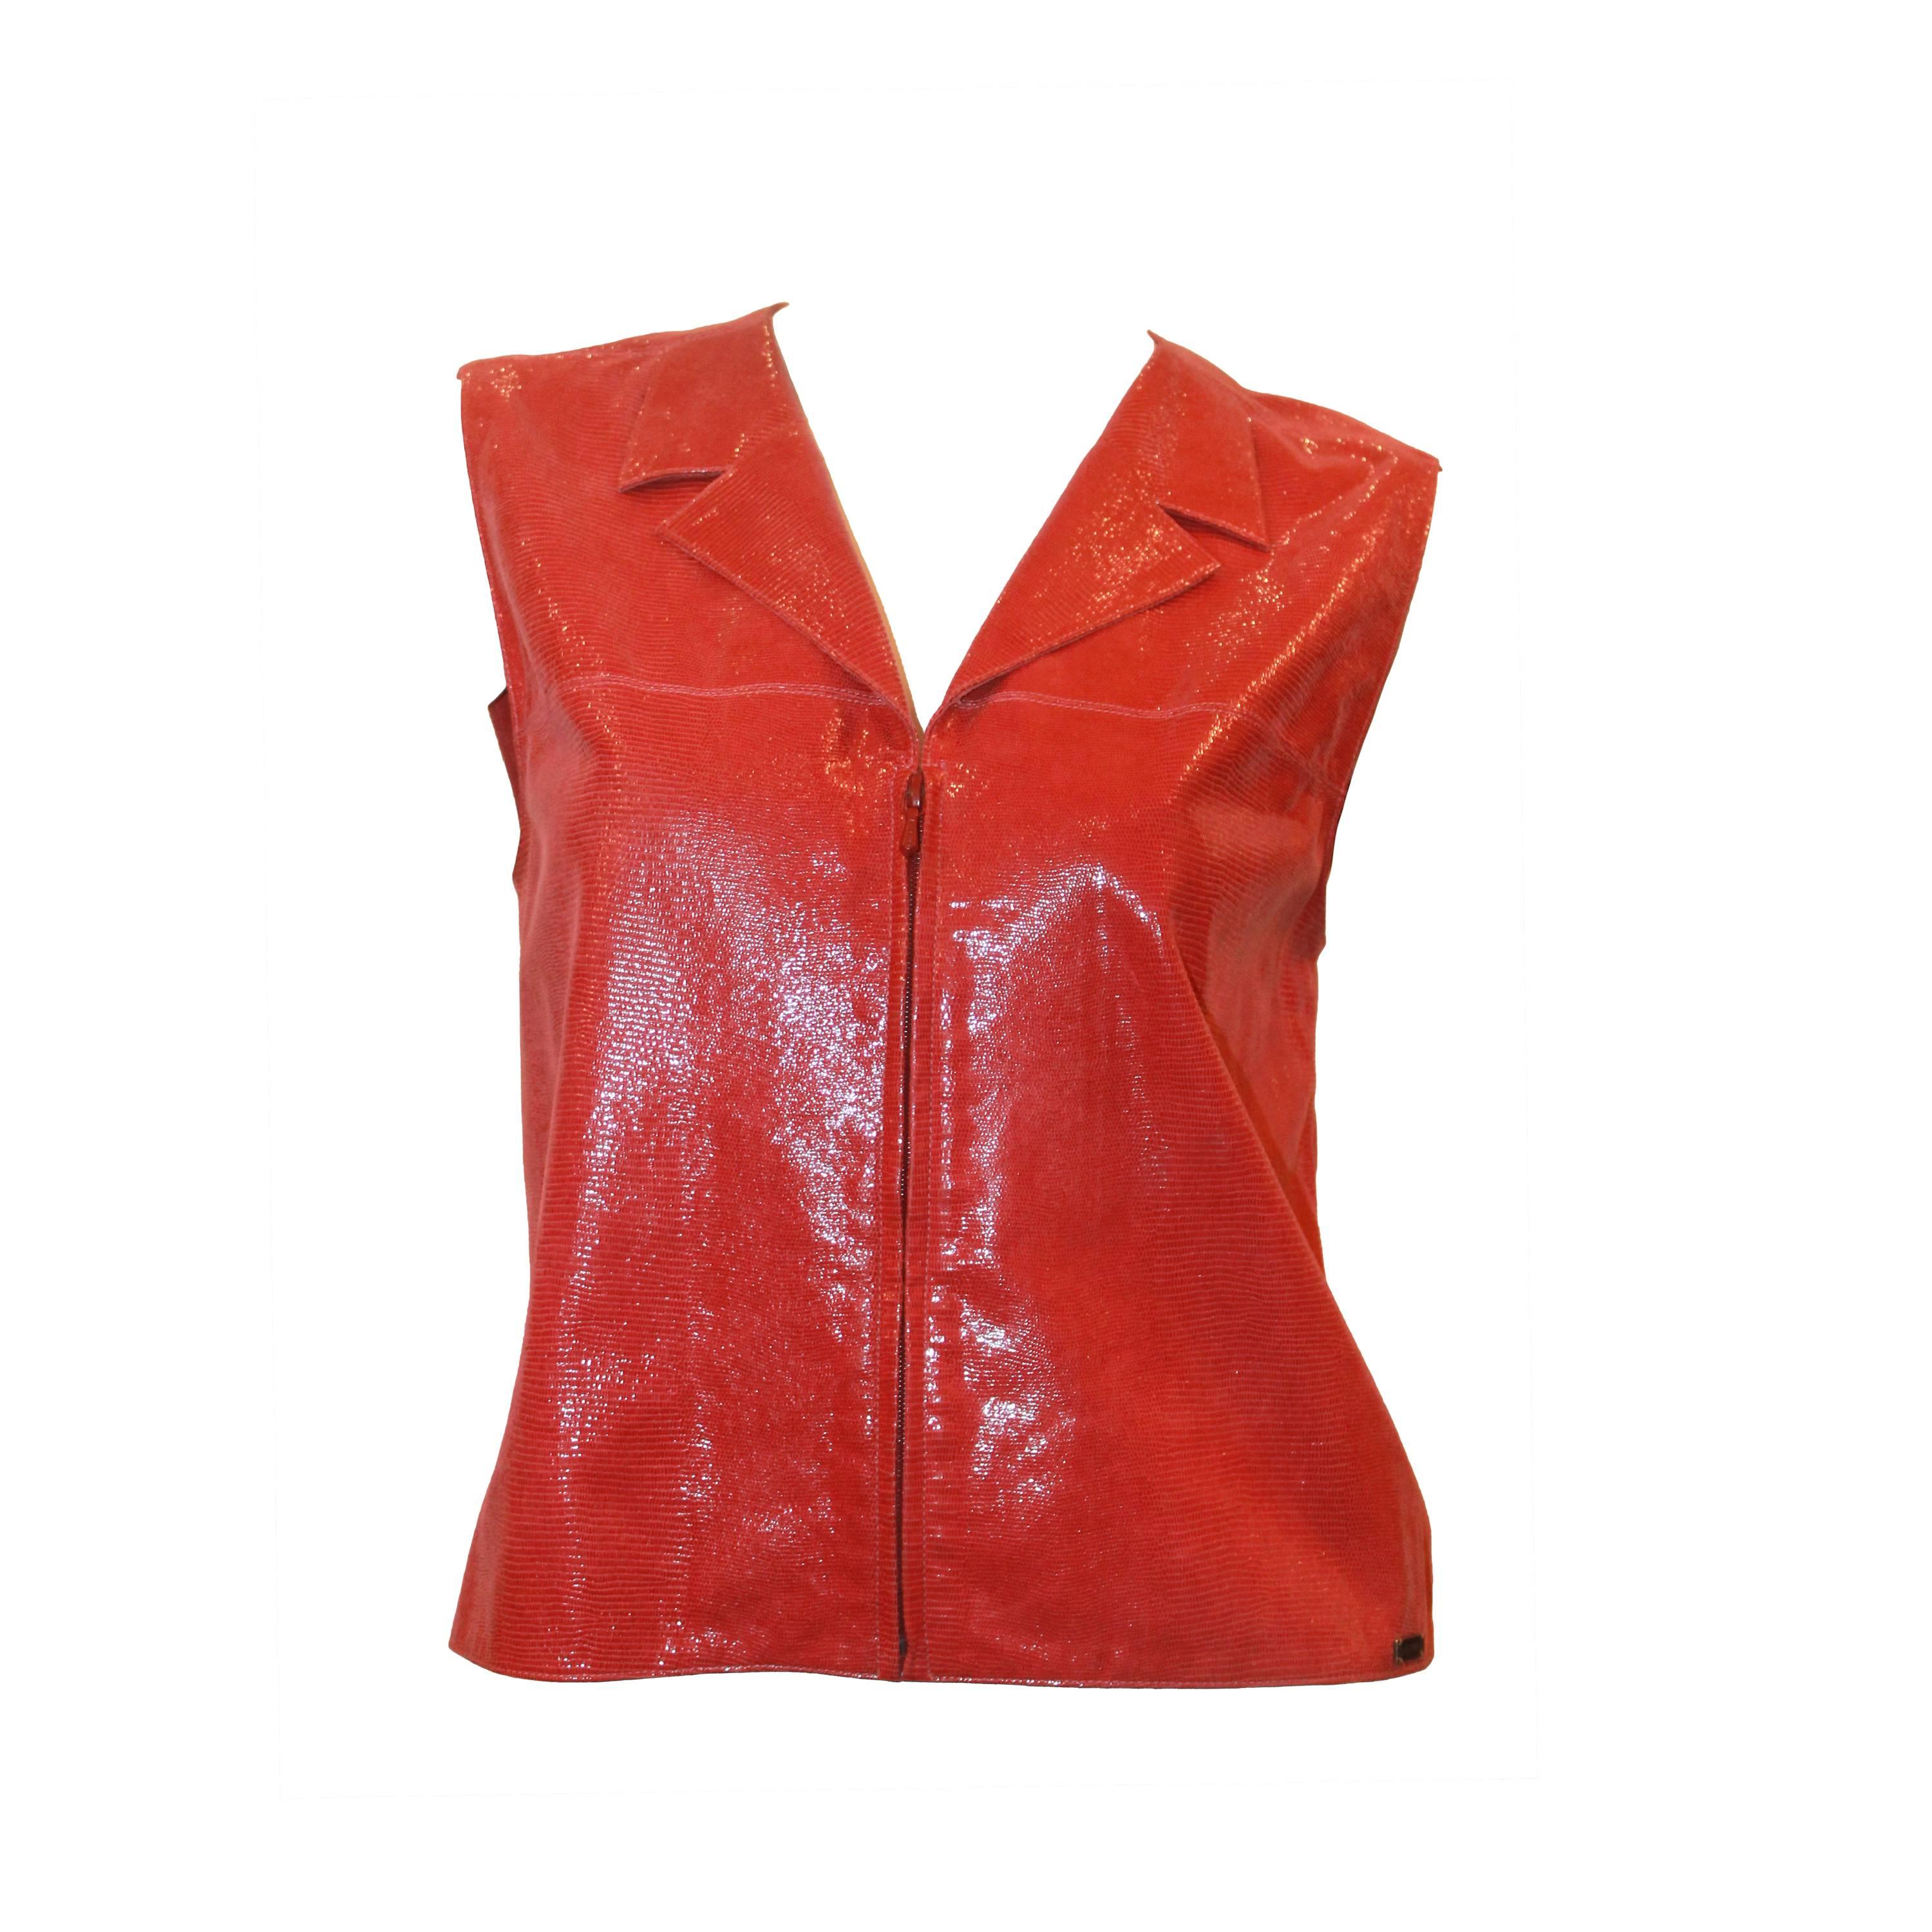 Chanel Rose Lizard Embossed Leather Vest with Front Zip - 38 - circa 2001